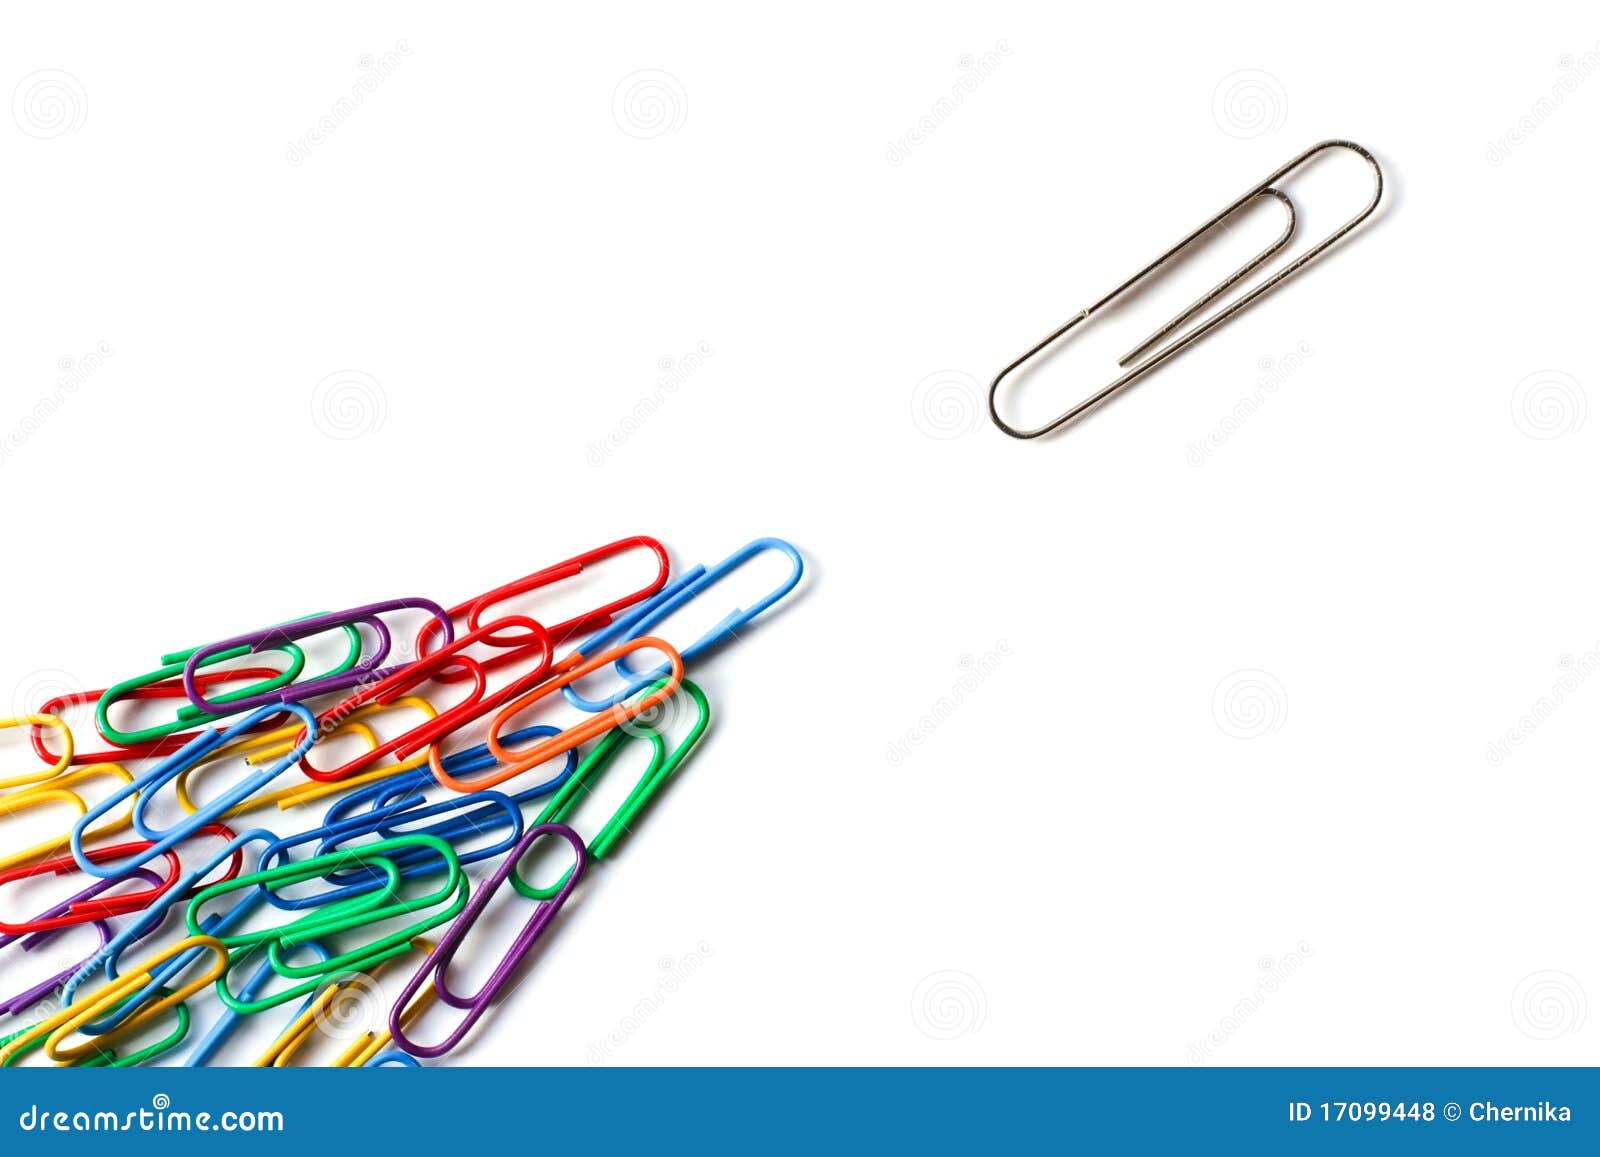 various paper clips